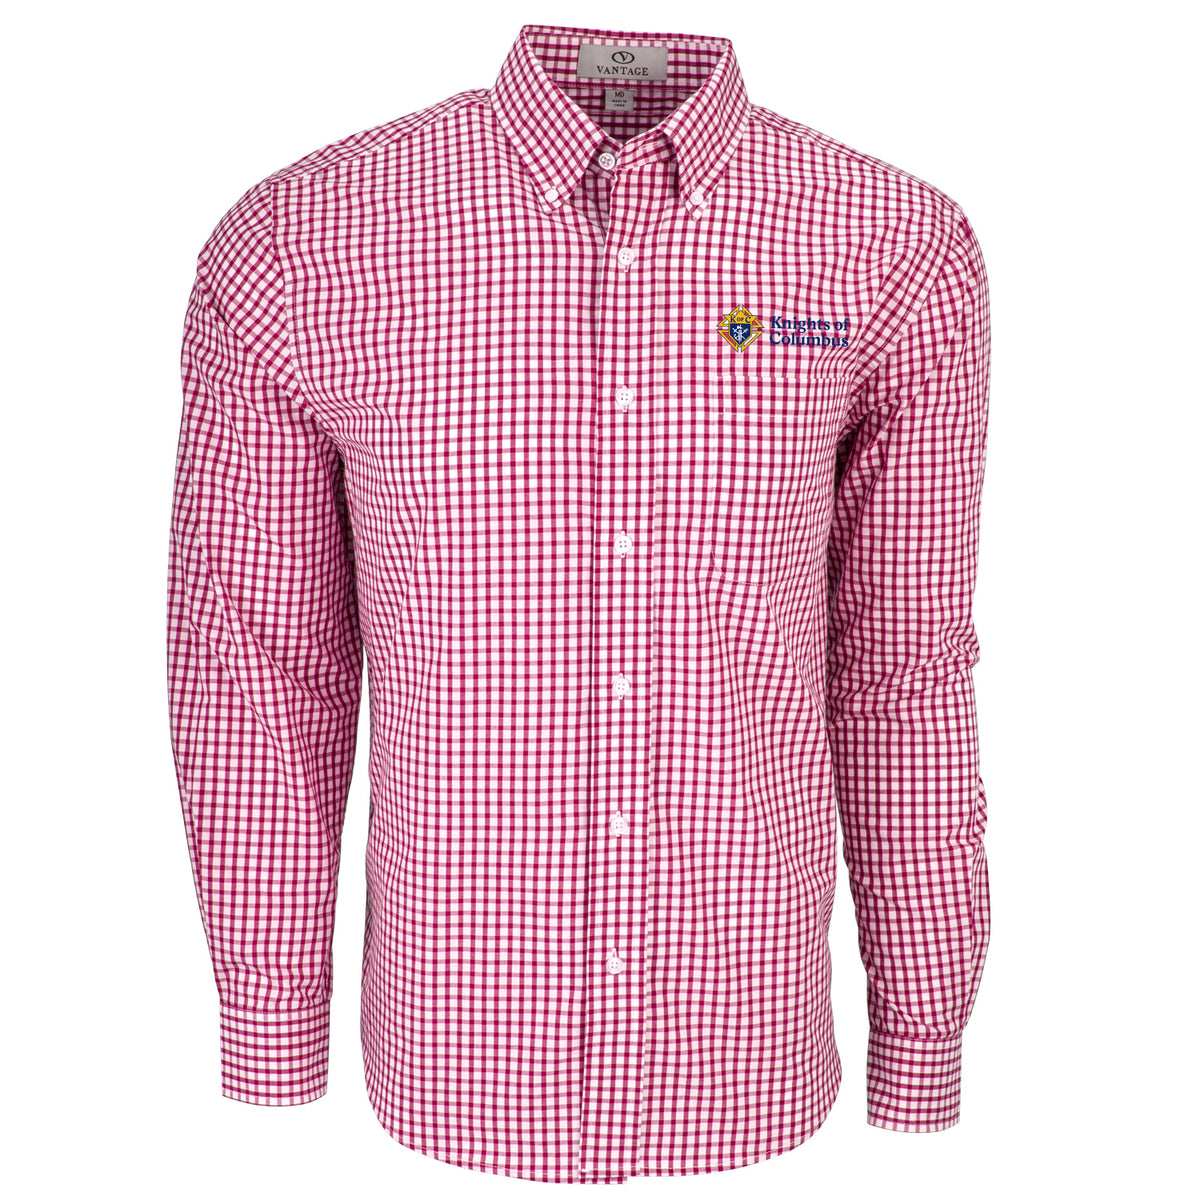 Easy-Care Gingham Check Button-Down Shirt